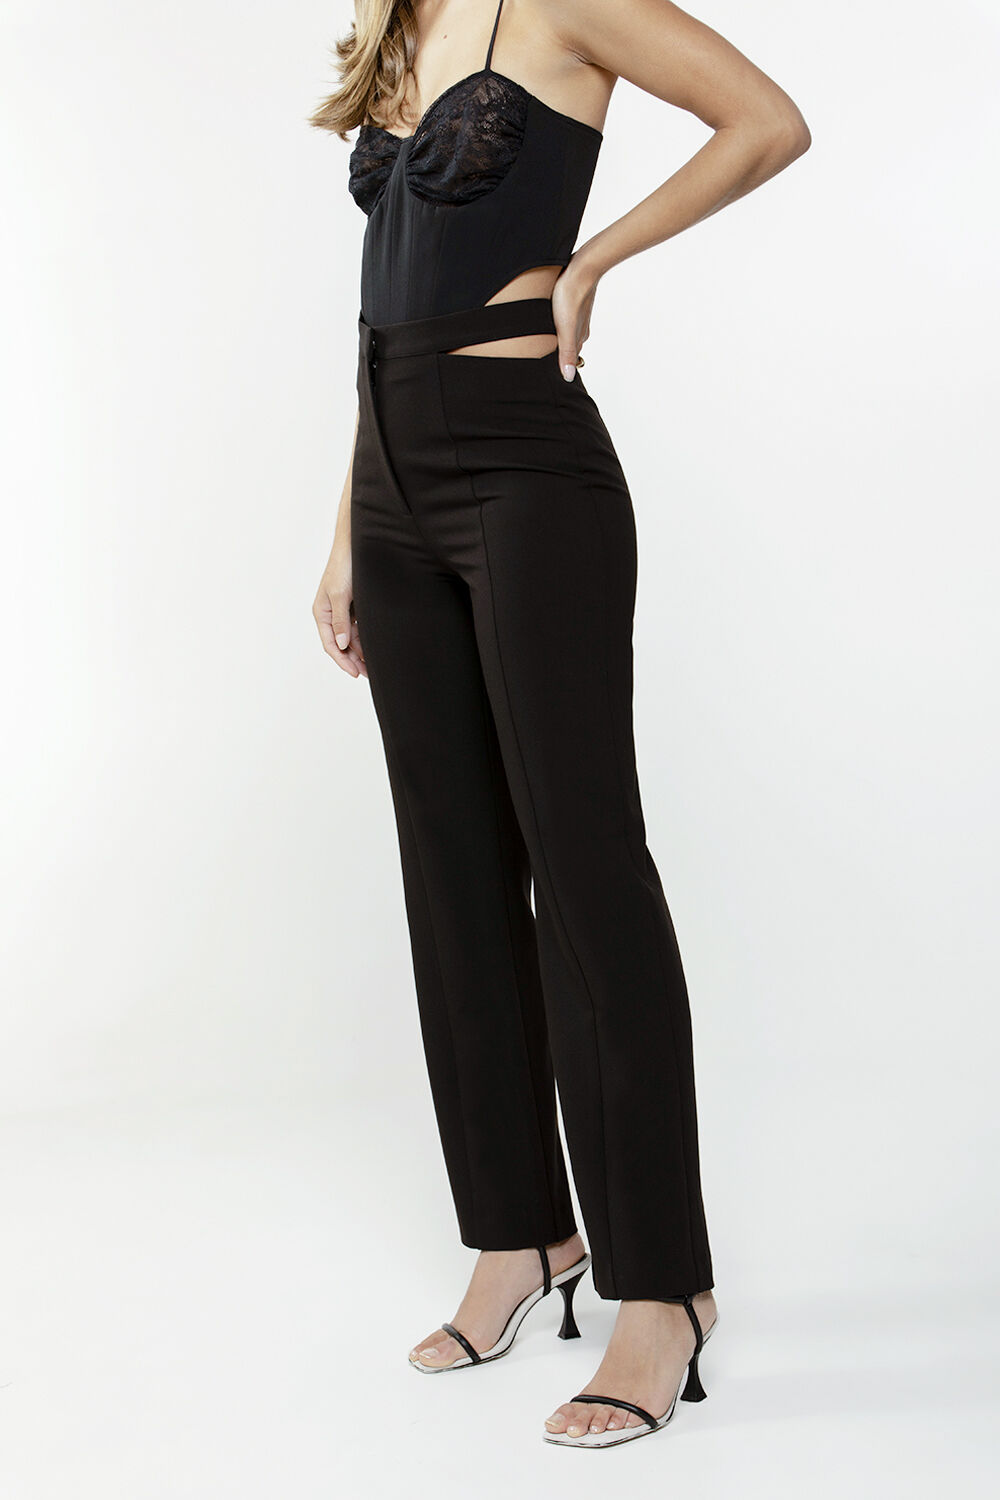 KYLIE CUT OUT PANT in colour CAVIAR